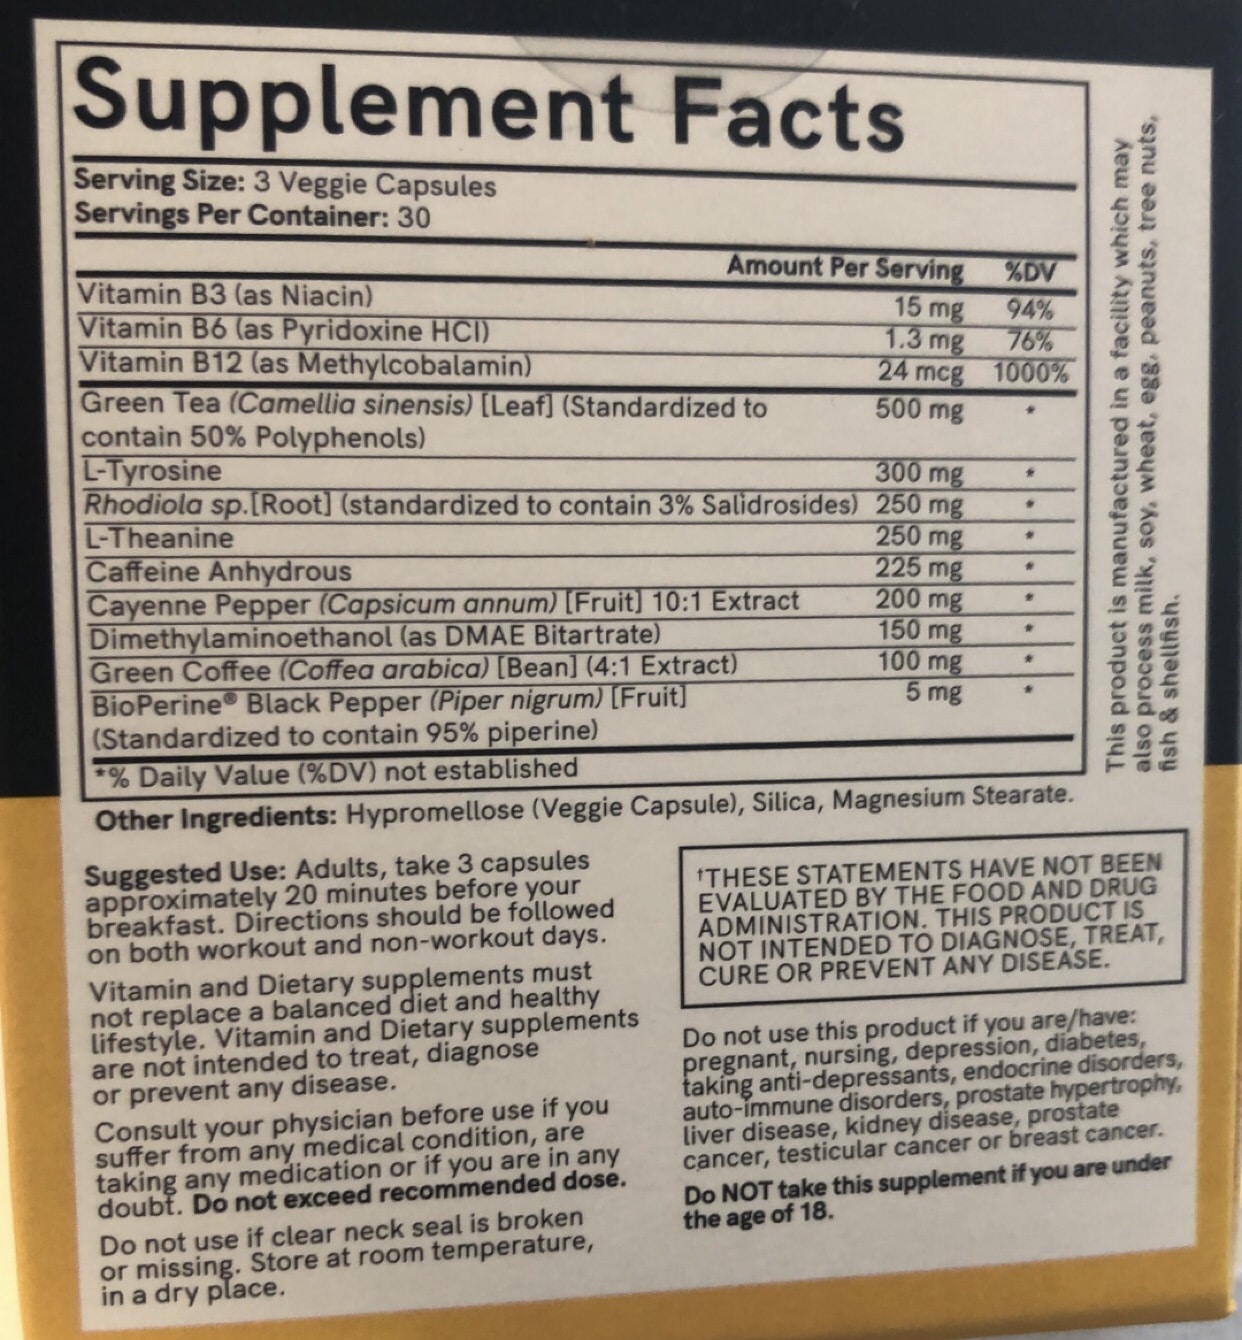 Prime shred ingredients and supplement facts